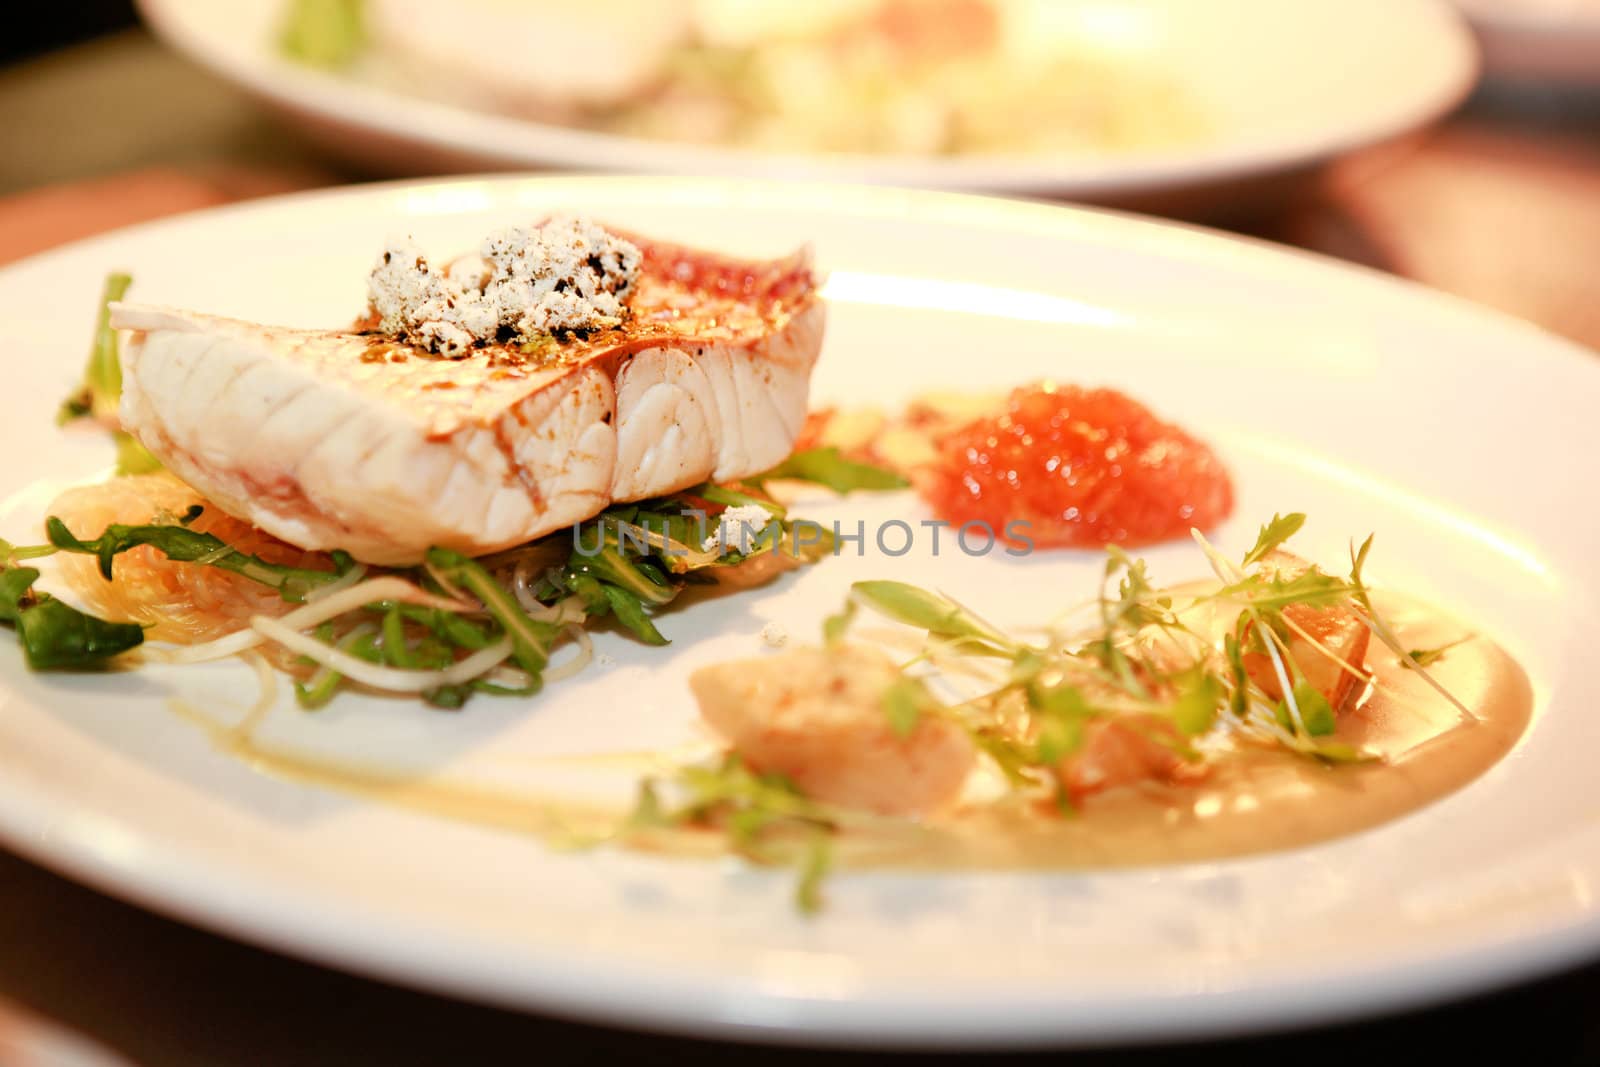 Delicious gourmet seafood meal with a grilled fish fillet served on fresh sliced vegetables and salad at a restaurant